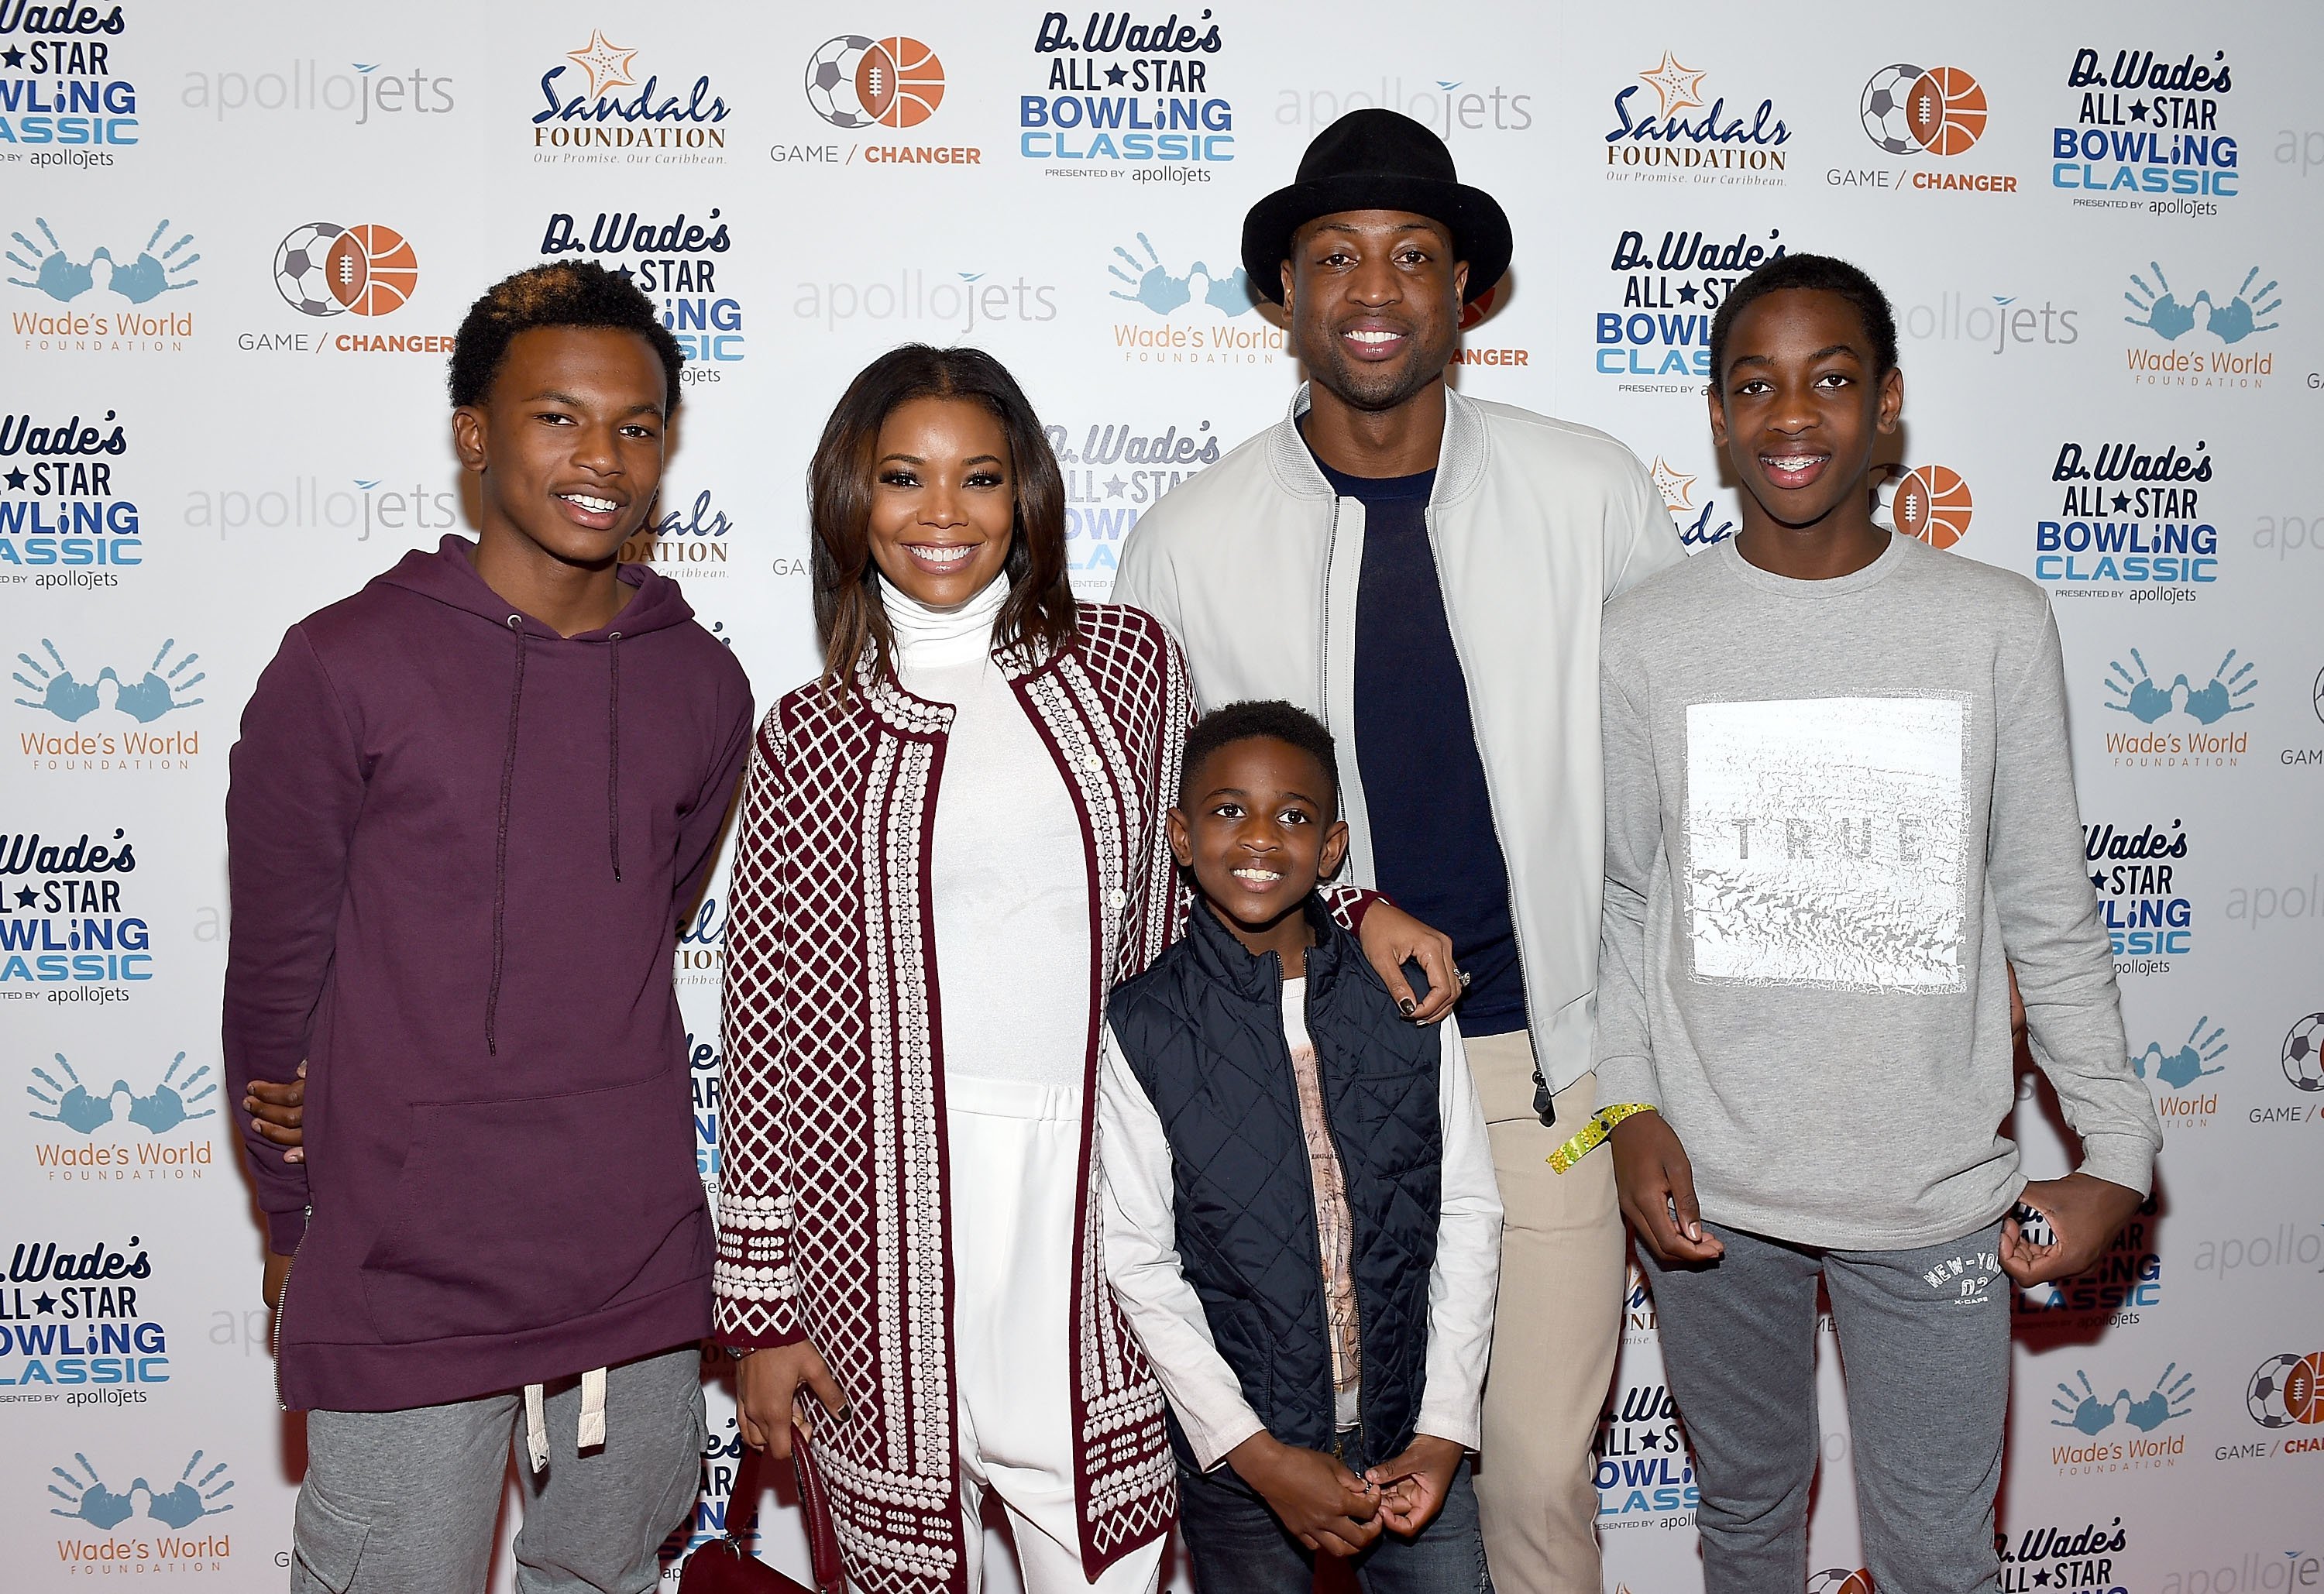 (From left) Dahveon Morris, Gabrielle Union, Zion Wade, Dwyane Wade, and Zaire Wade attend the DWade All Star Bowling Classic in Toronto, Canada on February 13, 2016 | Photo: Getty Images